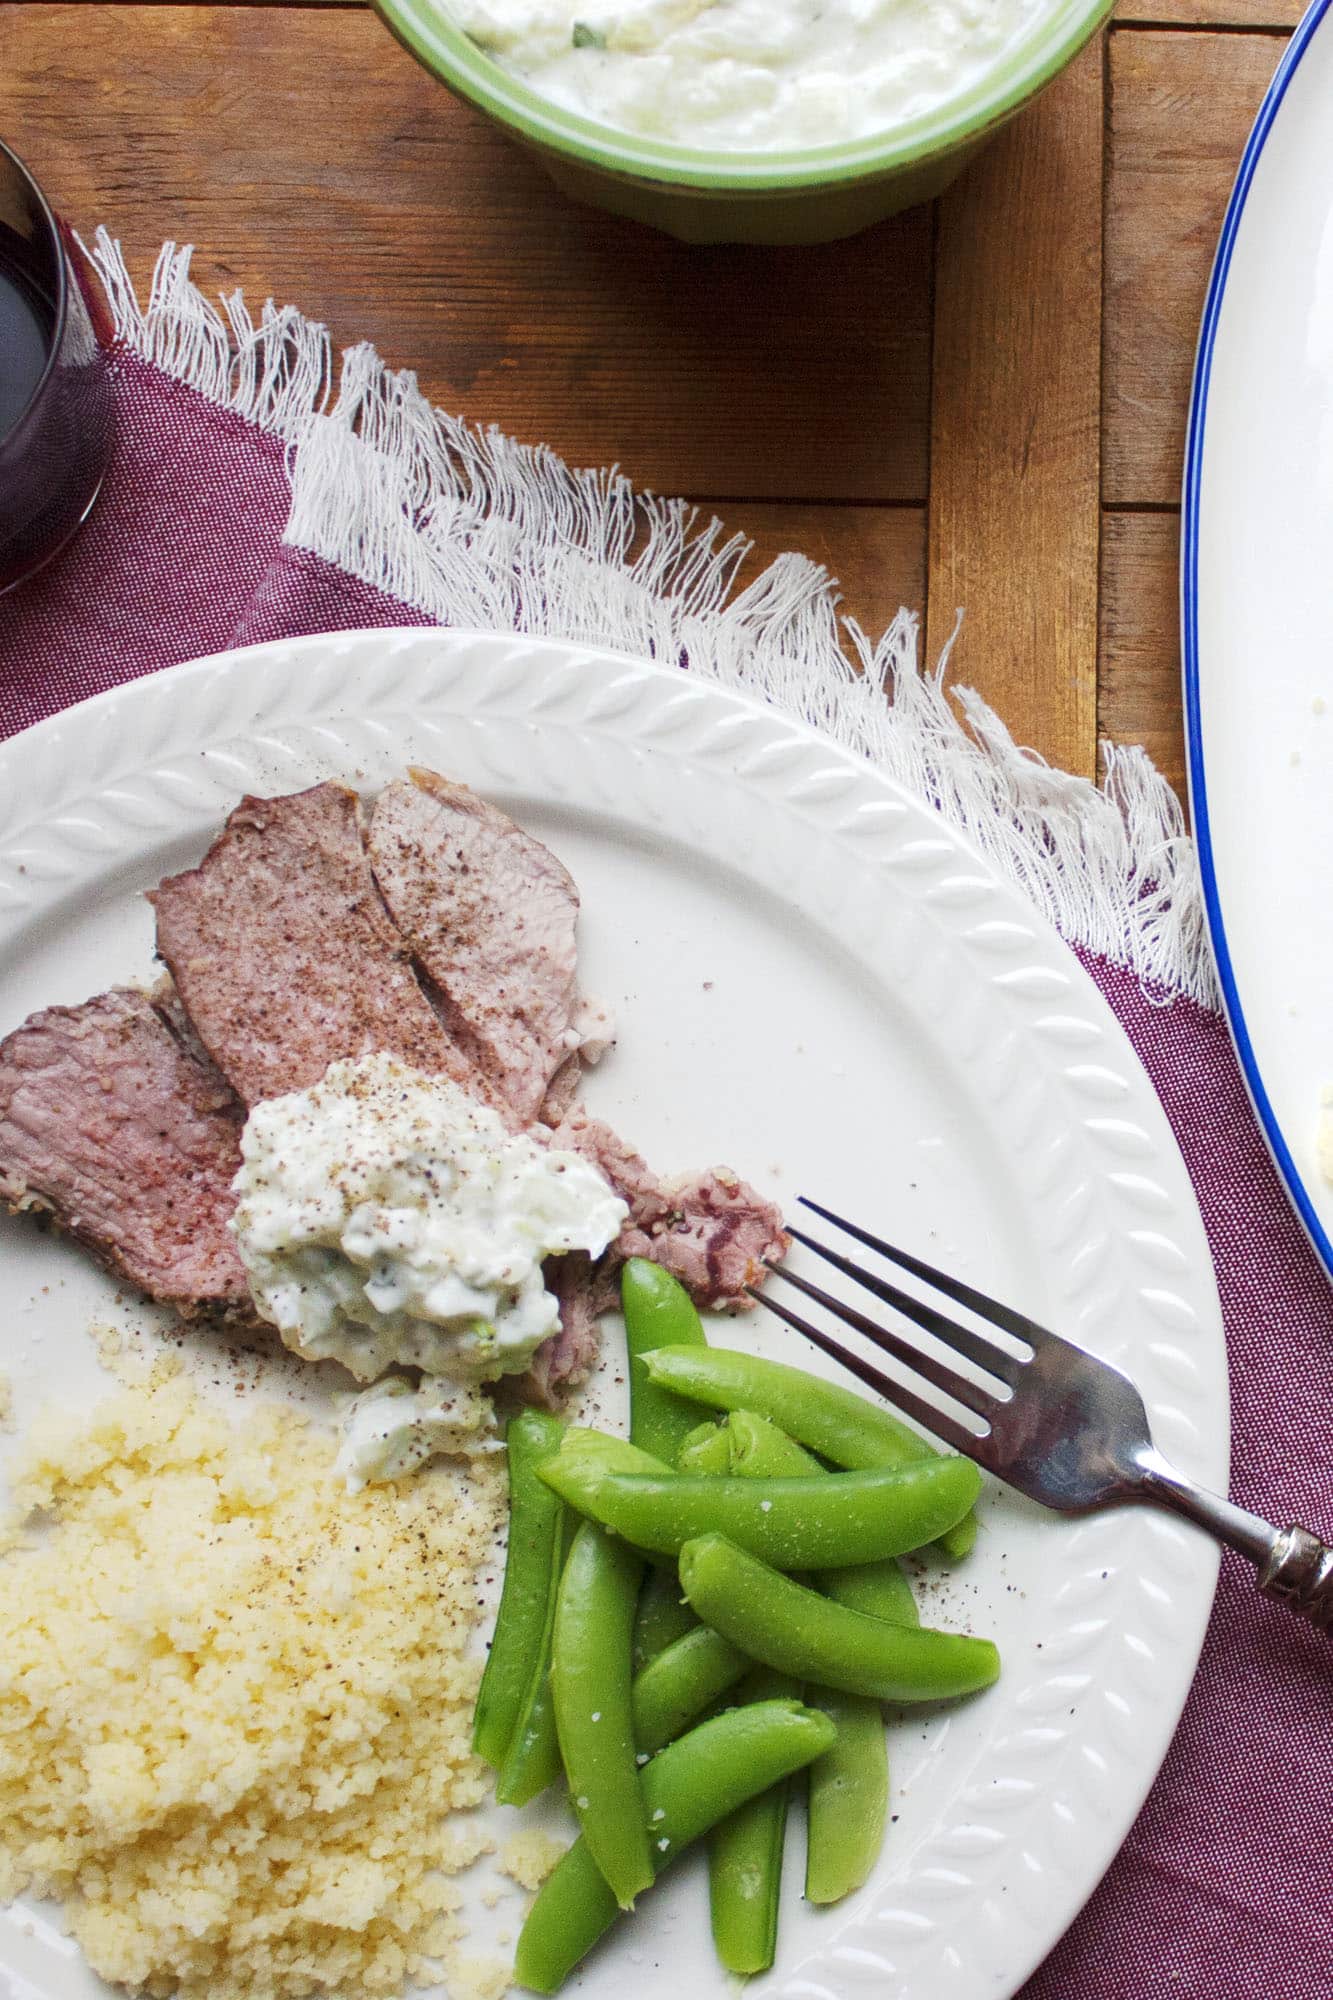 Slow Cooked Mediterranean Leg of Lamb with Tzatziki, couscous, and sugar snap peas.